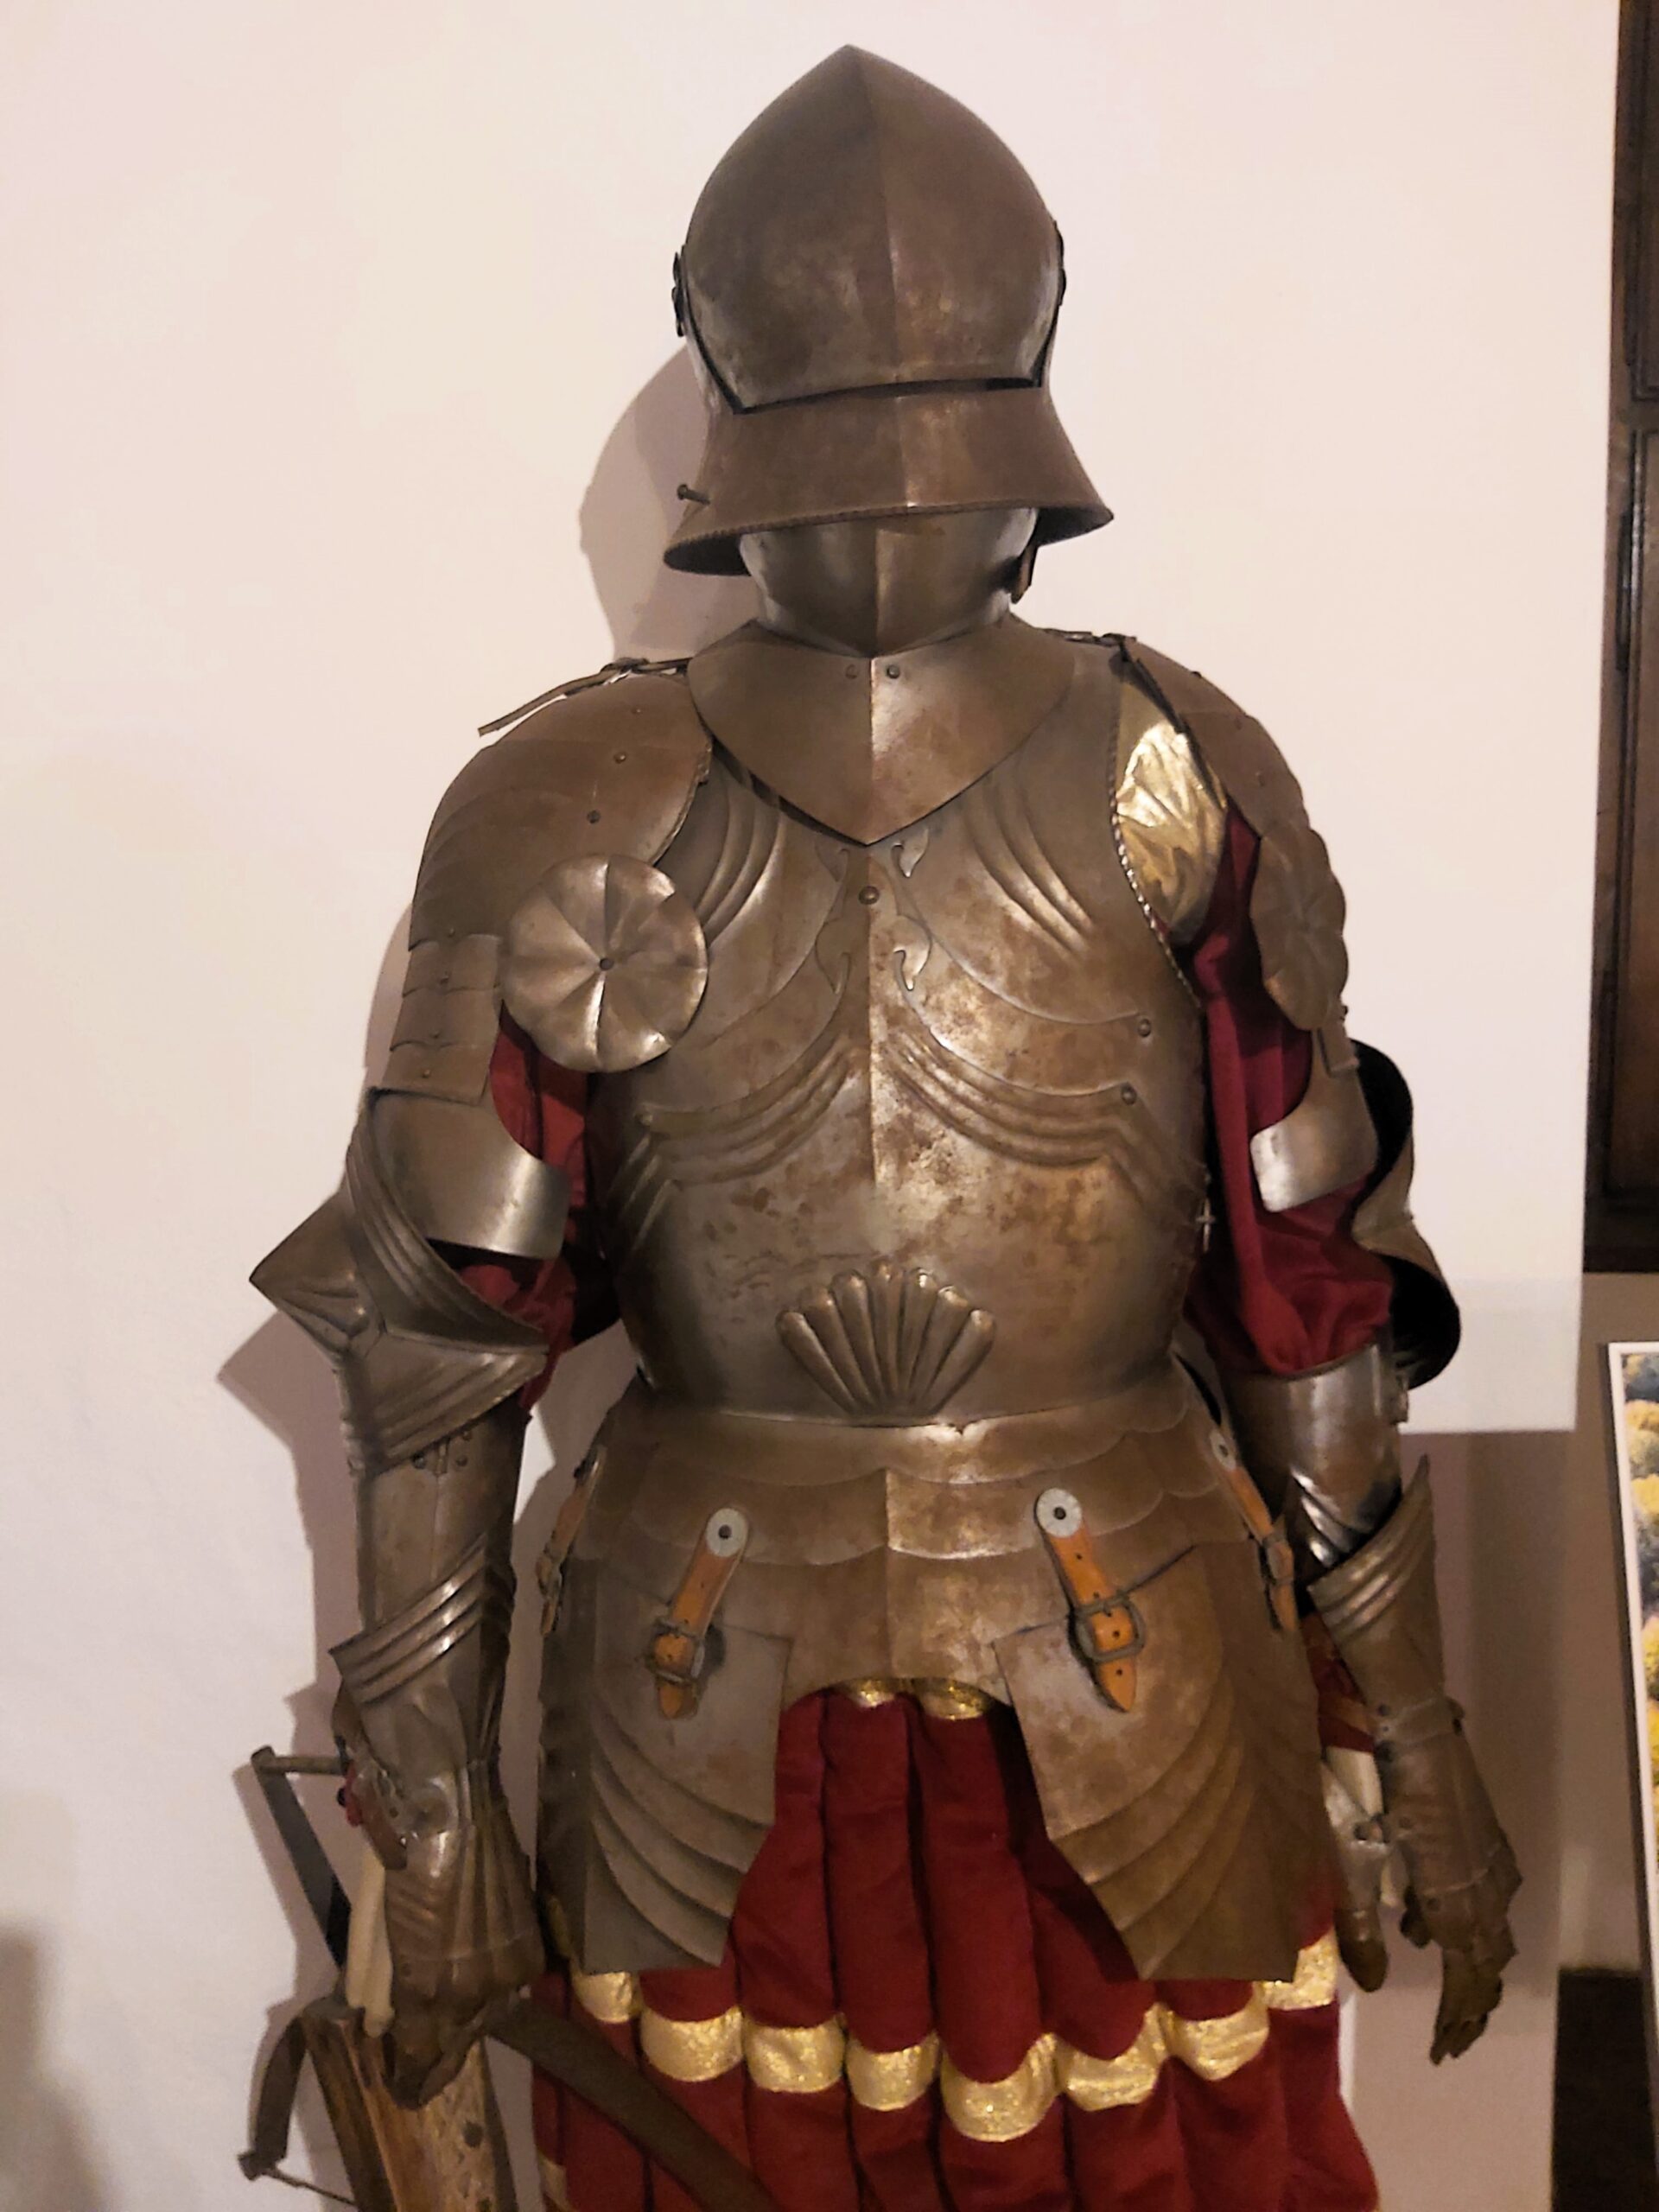 A suit of armour with red and gold cloth underneath in Bran Castle, Romania